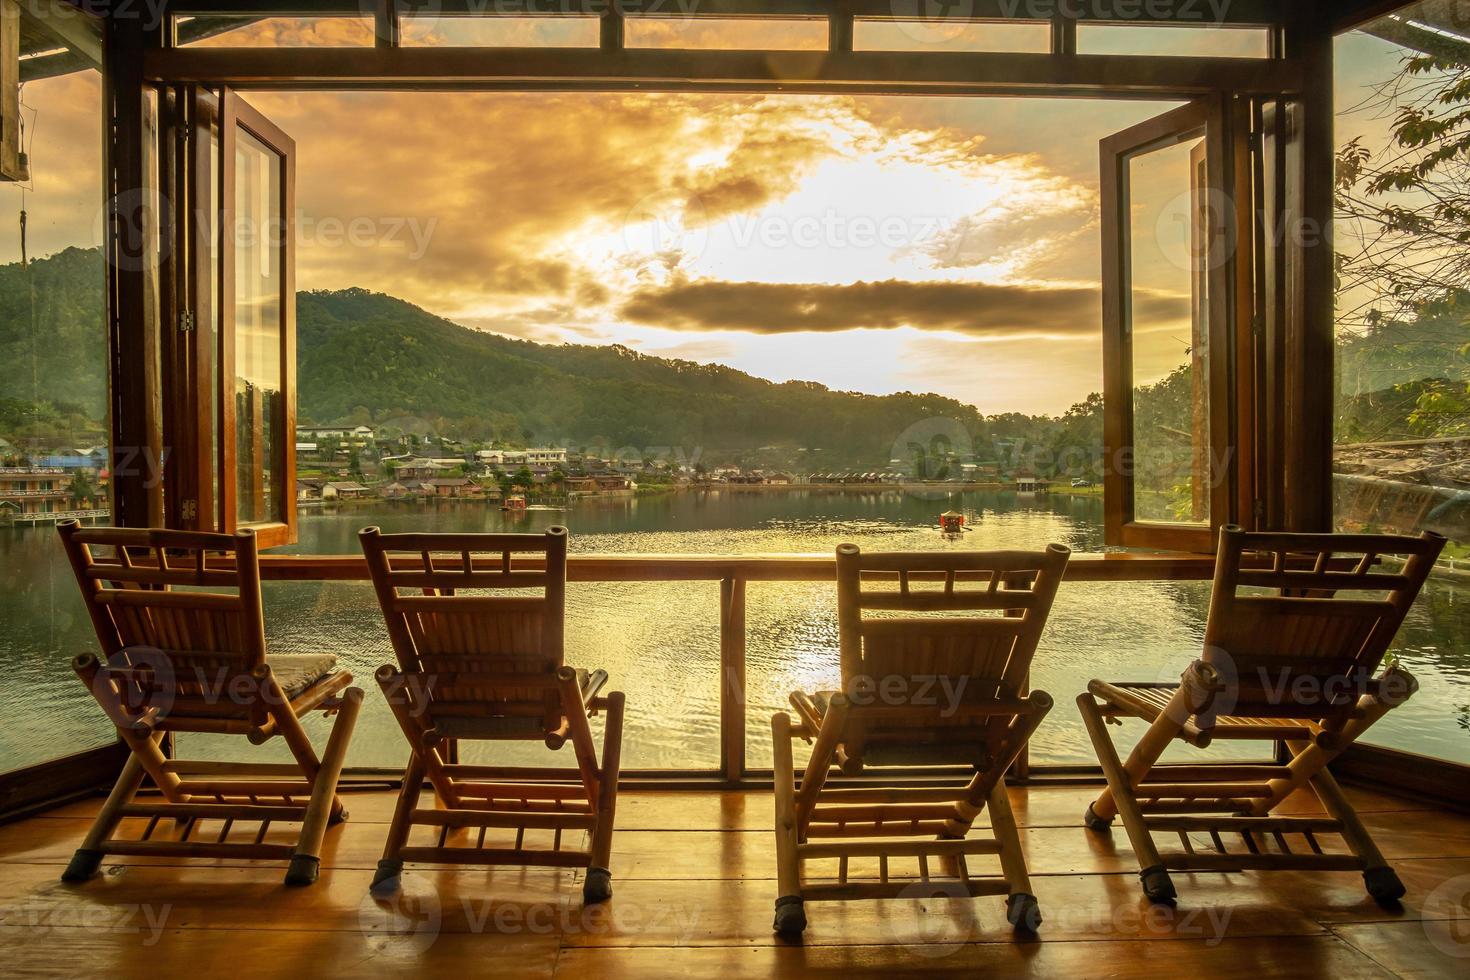 lake view at coffee shop in the morning sunrise, Ban Rak Thai village, landmark and popular for tourists attractions, Mae Hong Son province, Thailand. Travel concept photo